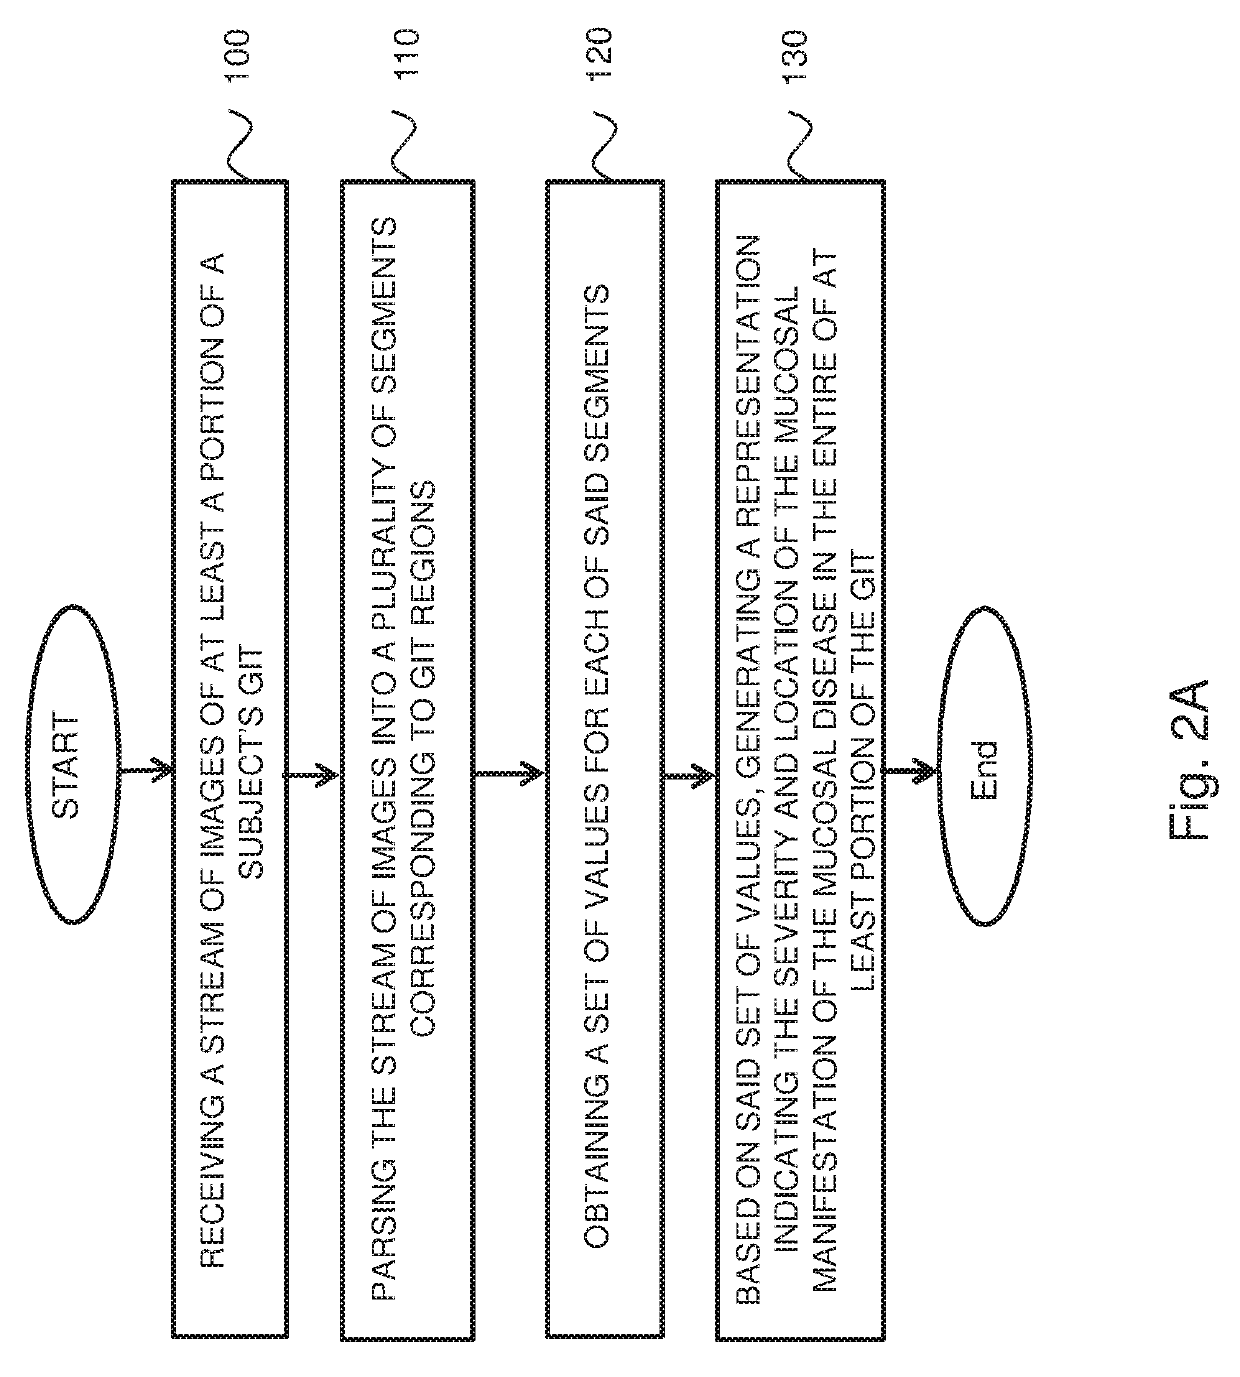 Systems and methods for assessment and monitoring of a mucosal disease in a subject's gastrointestinal tract